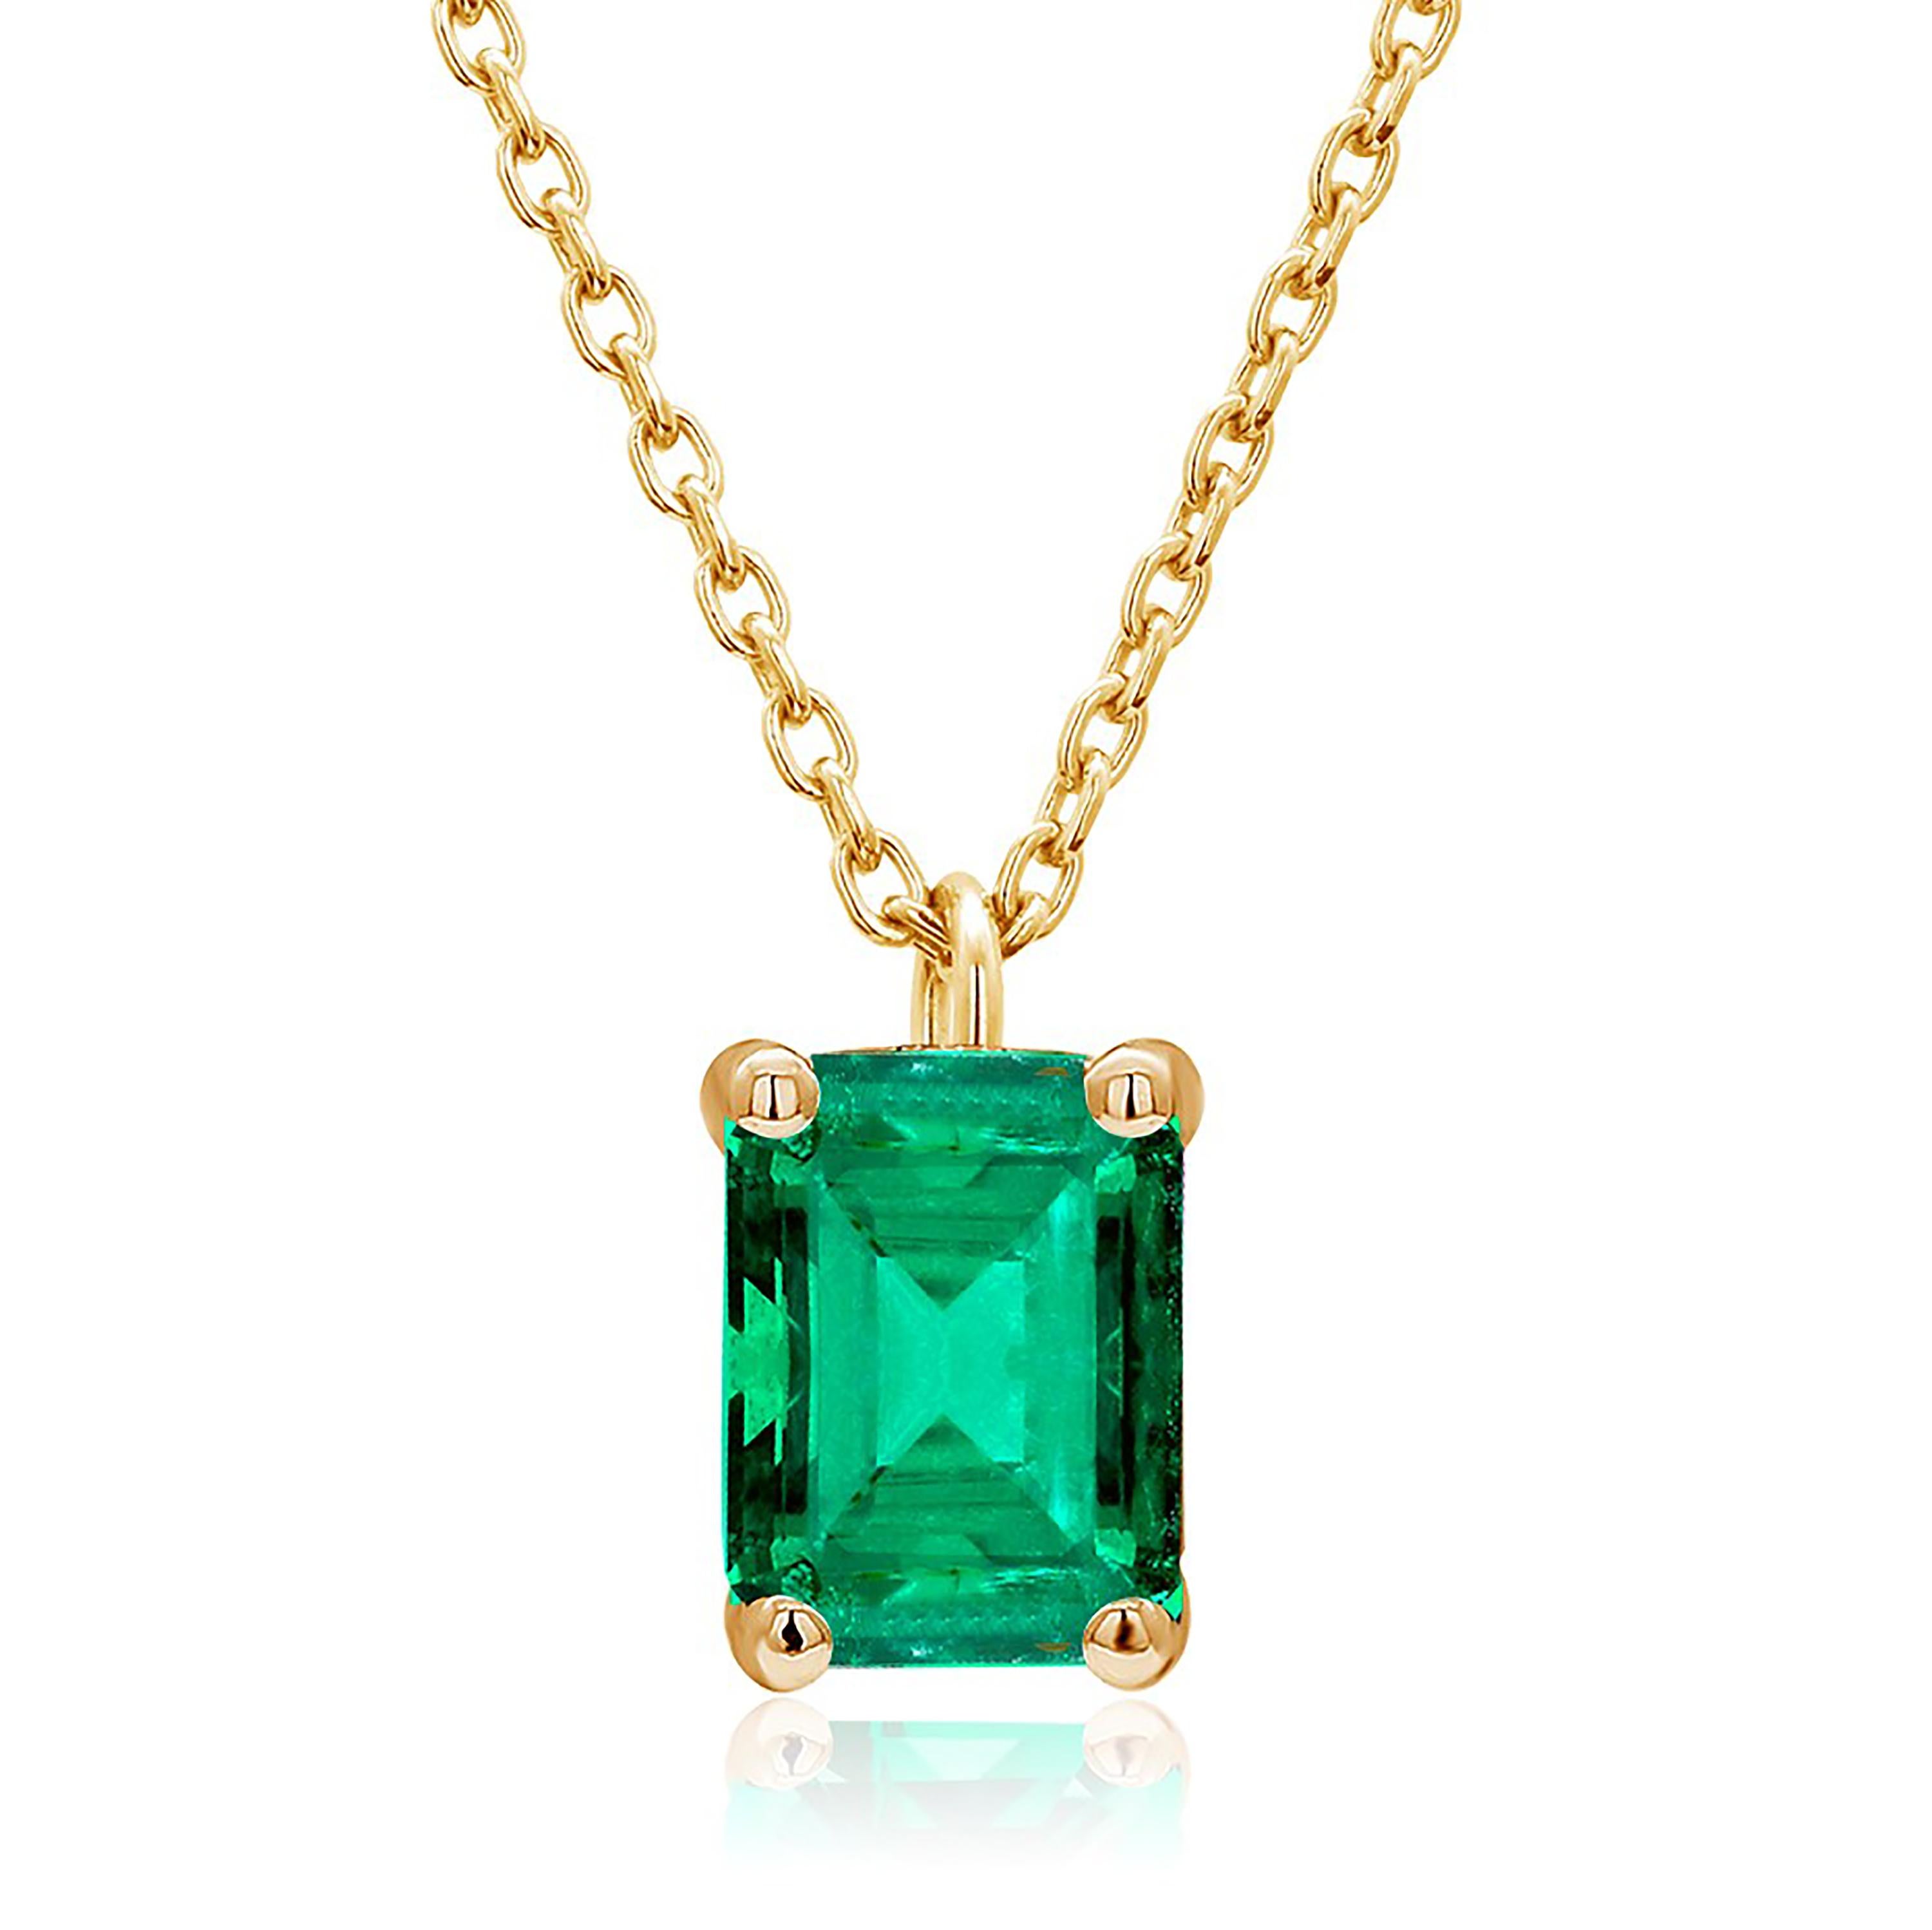 14 karats yellow gold necklace pendant with Colombia emerald
Necklace measuring 16 inches long
Colombia emerald-cut emerald  weighing 0.85 carats
Cable chain necklace with lobster spring lock
Emerald cut emerald measuring 8x6 millimeter, 0.35-inch